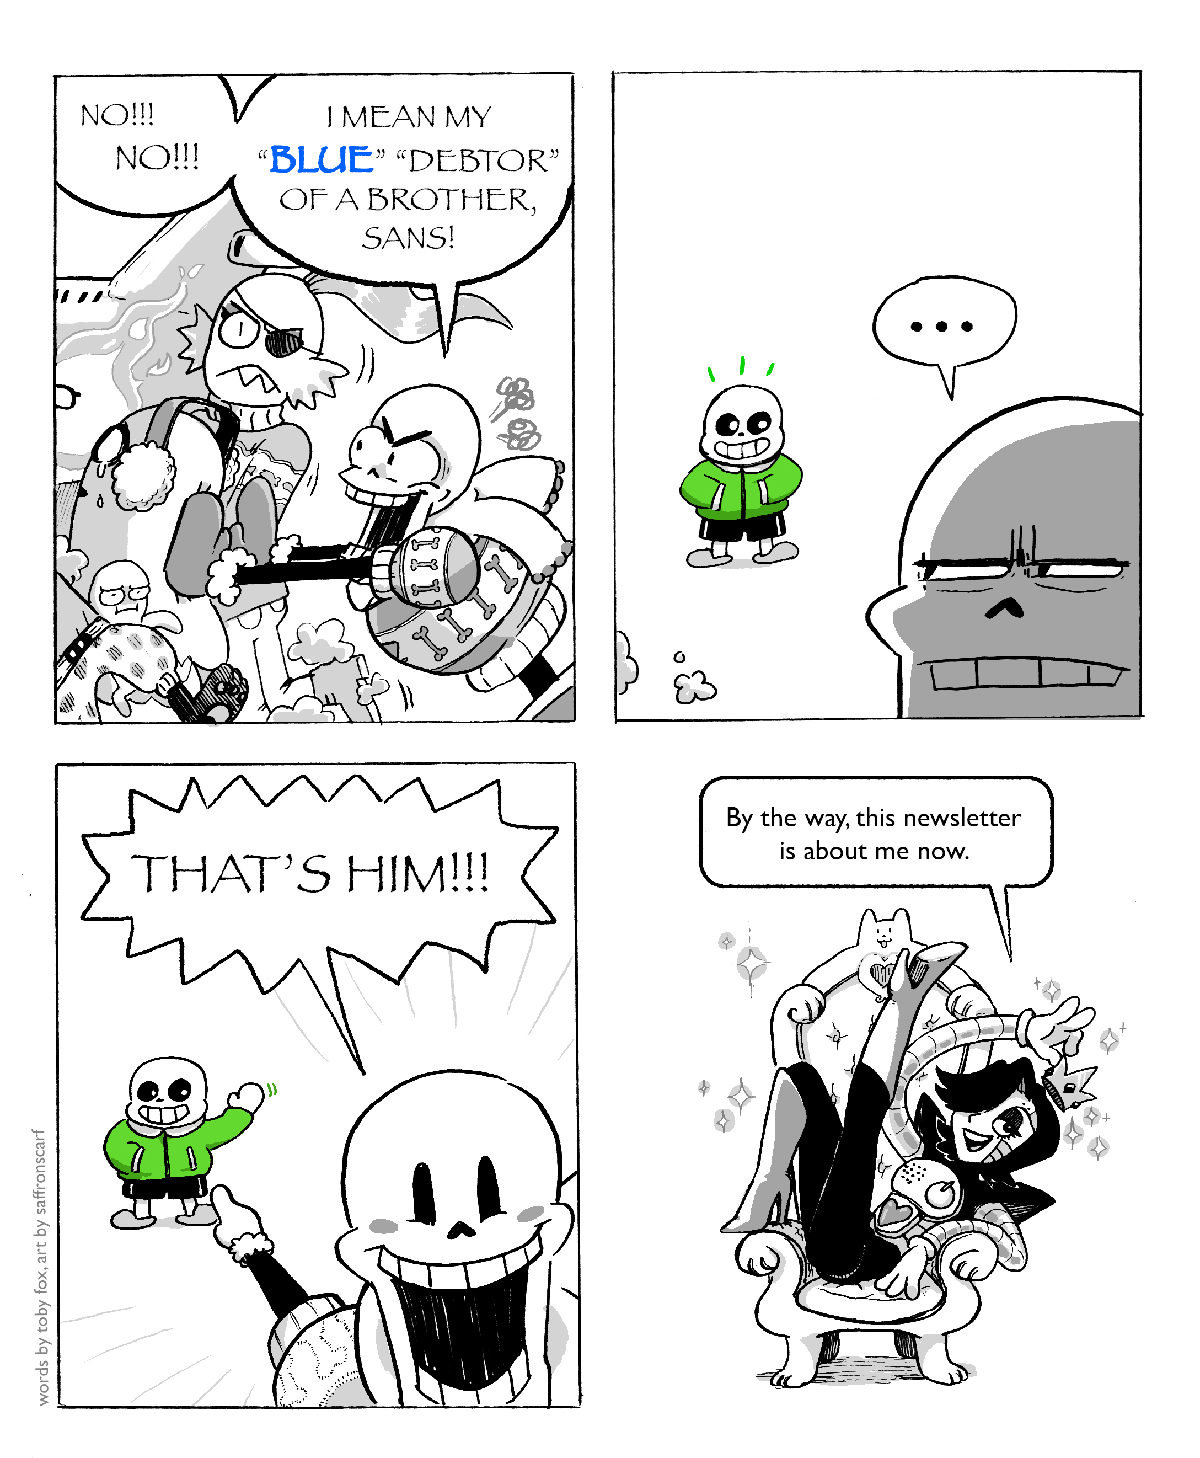 Page two of two. Four panels. First panel shows Papyrus frustratedly shoving the Snowdin characters off-screen, saying 'NO!!! NO!!! I MEAN MY 'BLUE' 'DEBTOR' OF A BROTHER, SANS!'. Second panel shows Sans in the distance, grinning, and wearing a green sweater, while Papyrus narrows his eyes. Third panel shows Papyrus excitedly pointing and exclaiming 'THAT'S HIM!!!' as Sans waves. Fourth panel shows Mettaton EX lazing with a crown in a dog-themed chair, saying 'By the way, this newsletter is about me now.'